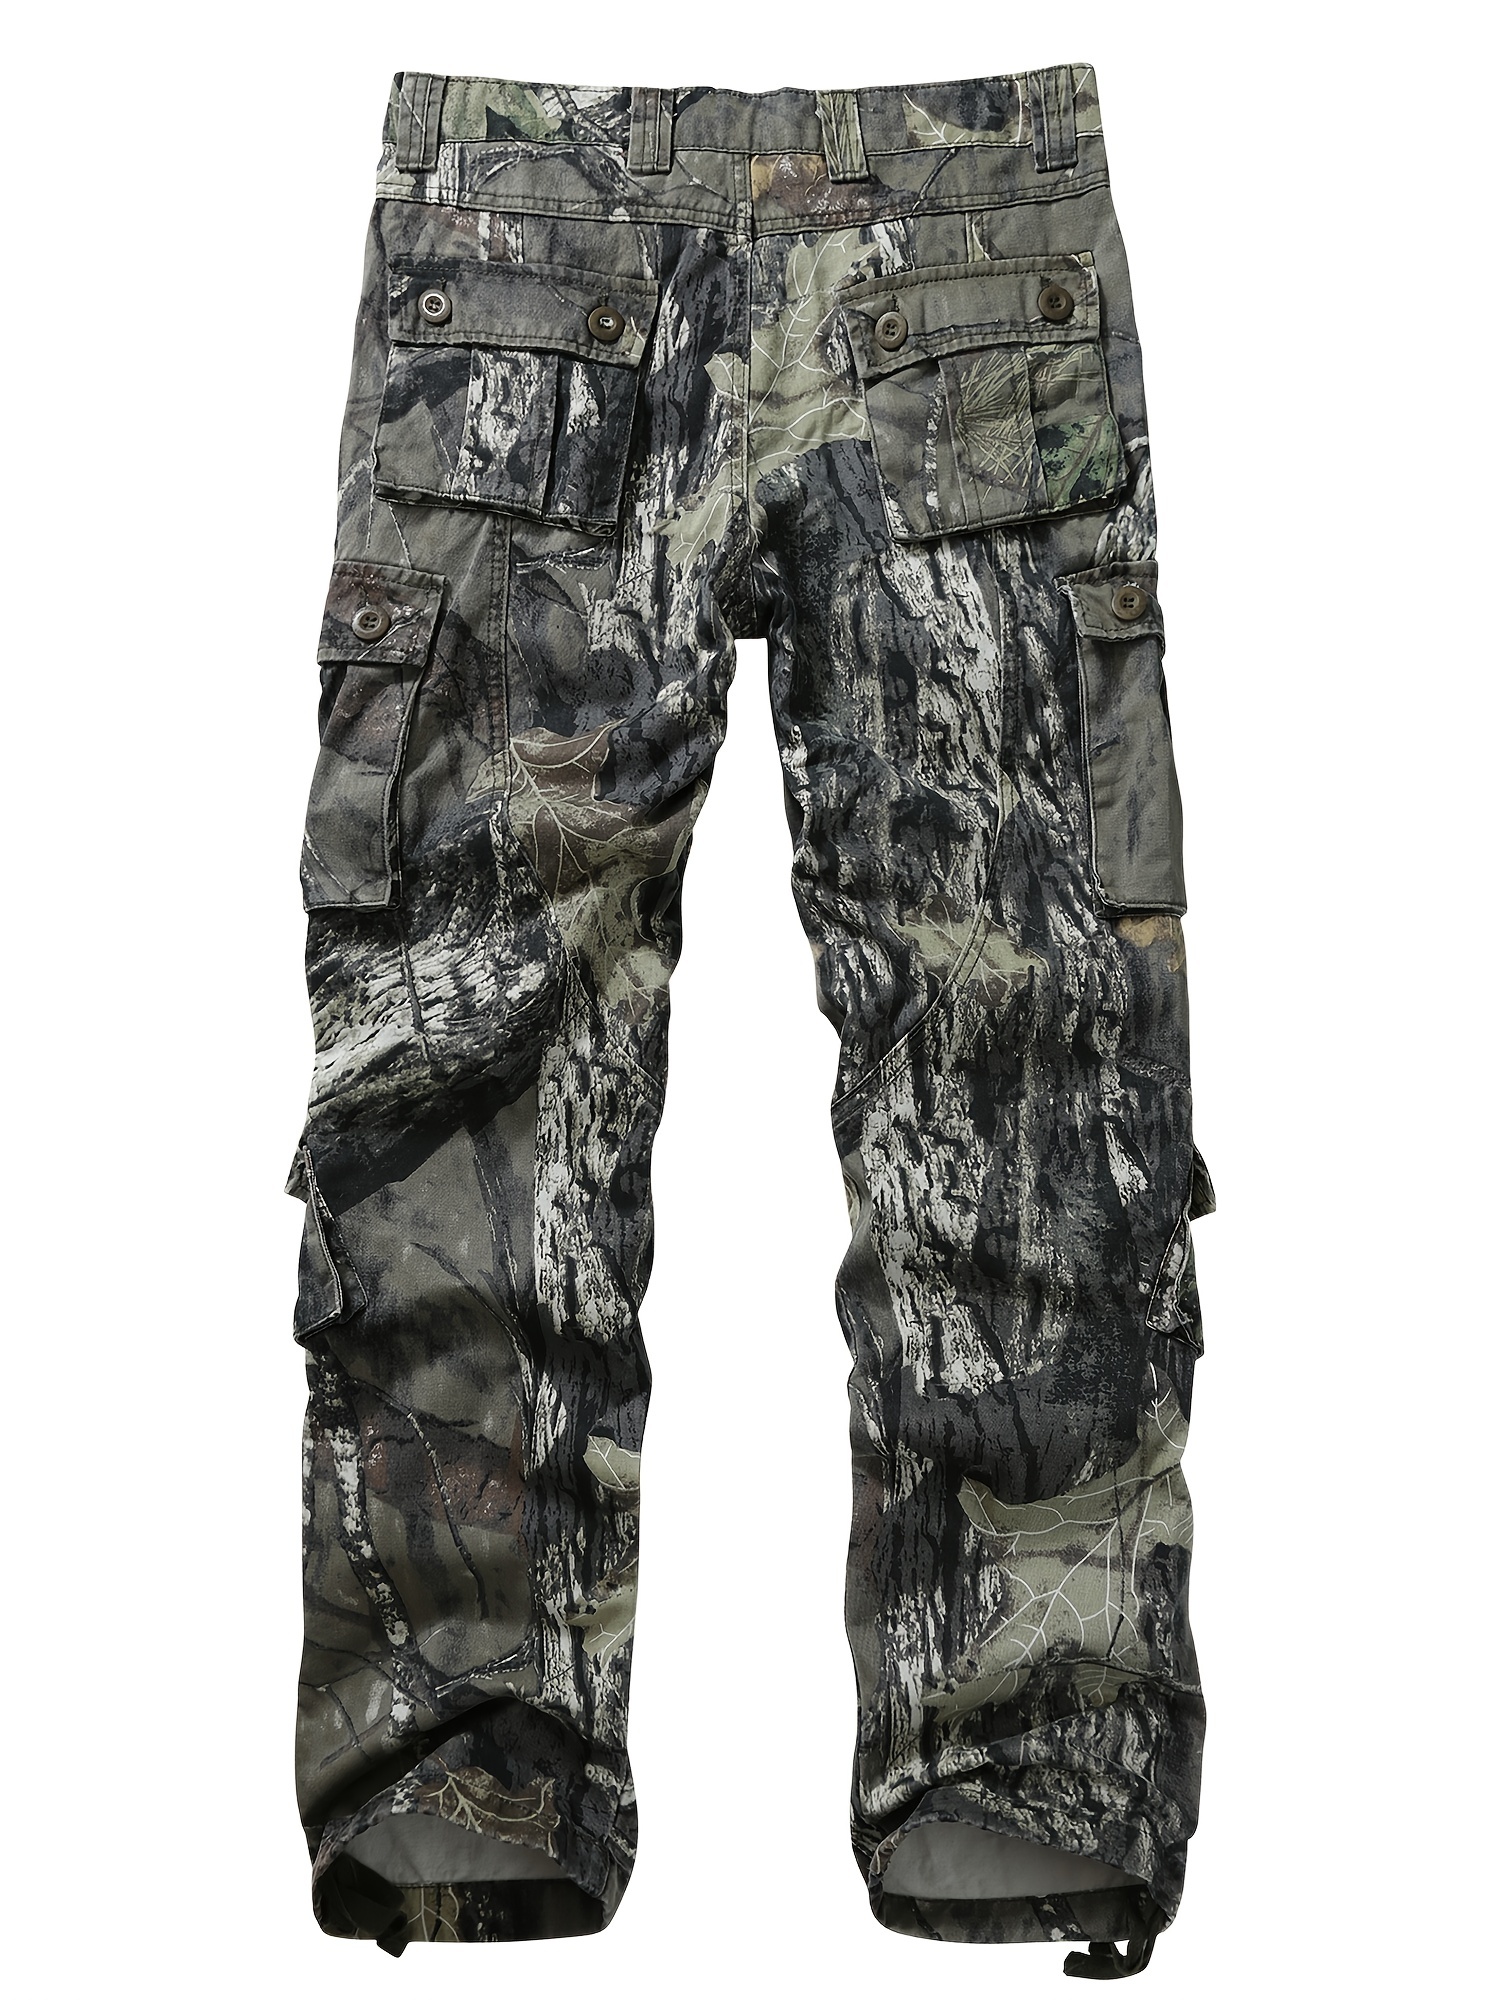 Affordable Wholesale mens cargo camo pants For Trendsetting Looks